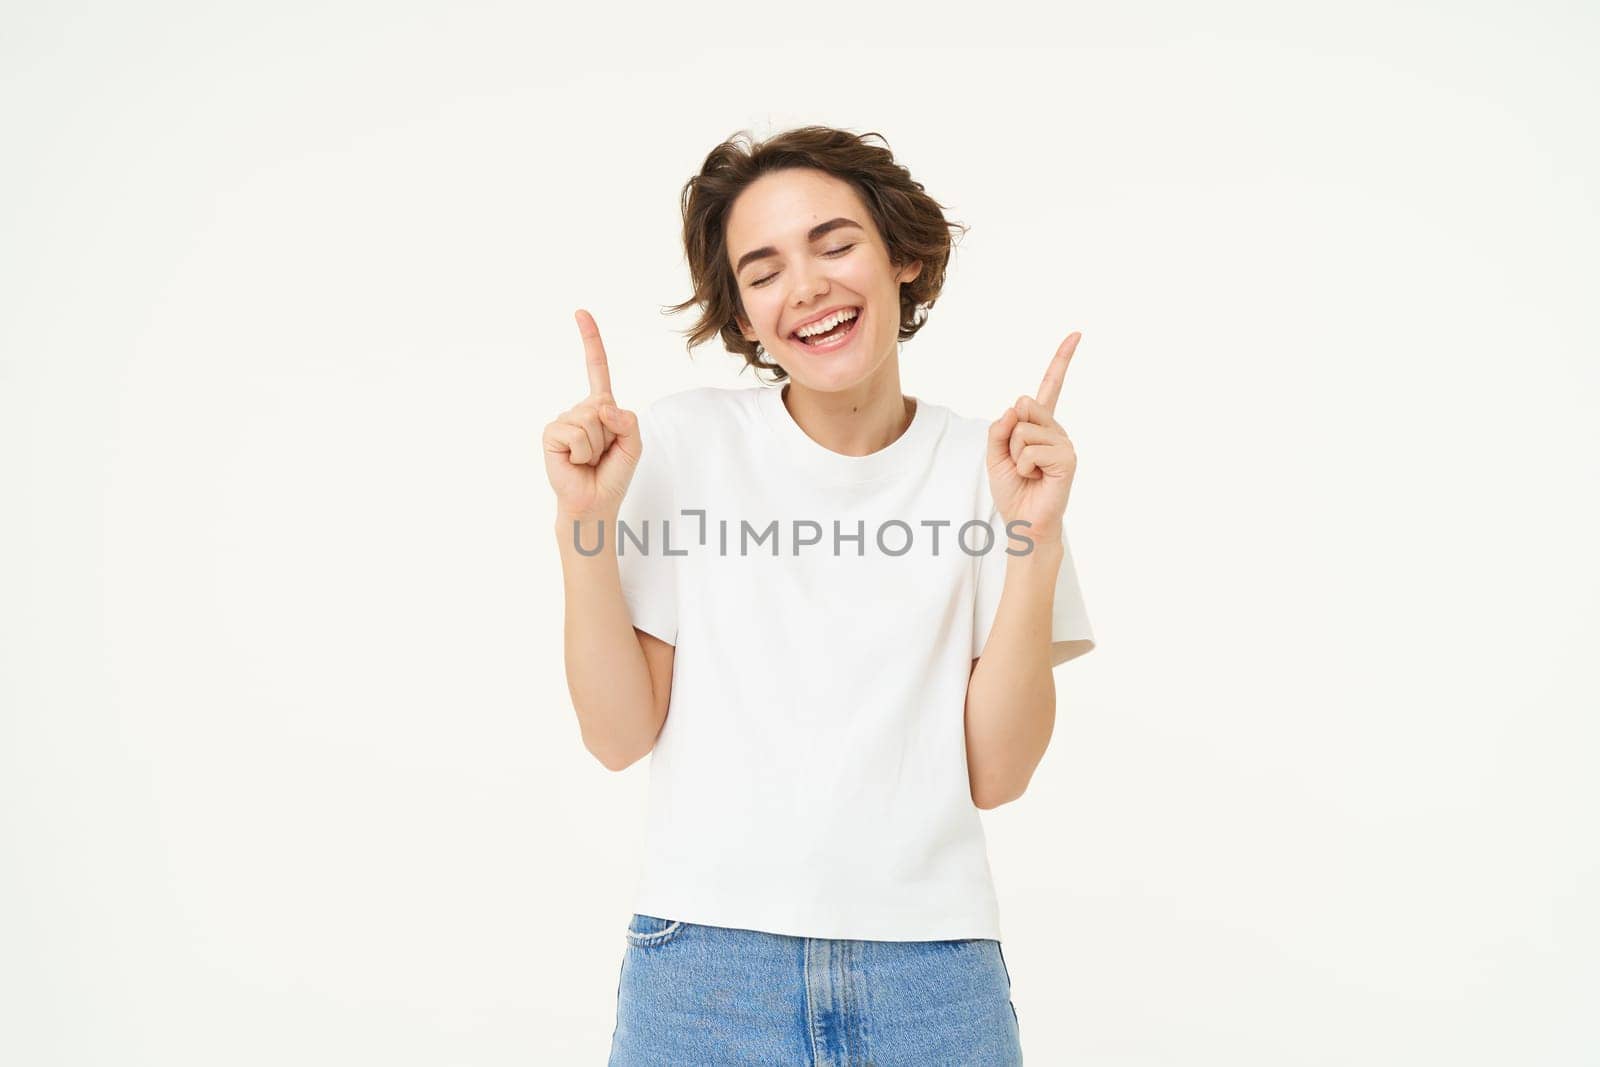 Image of carefree girl, laughing and smiling, pointing fingers up, showing promo offer, banner on top, posing over white studio background. Copy space